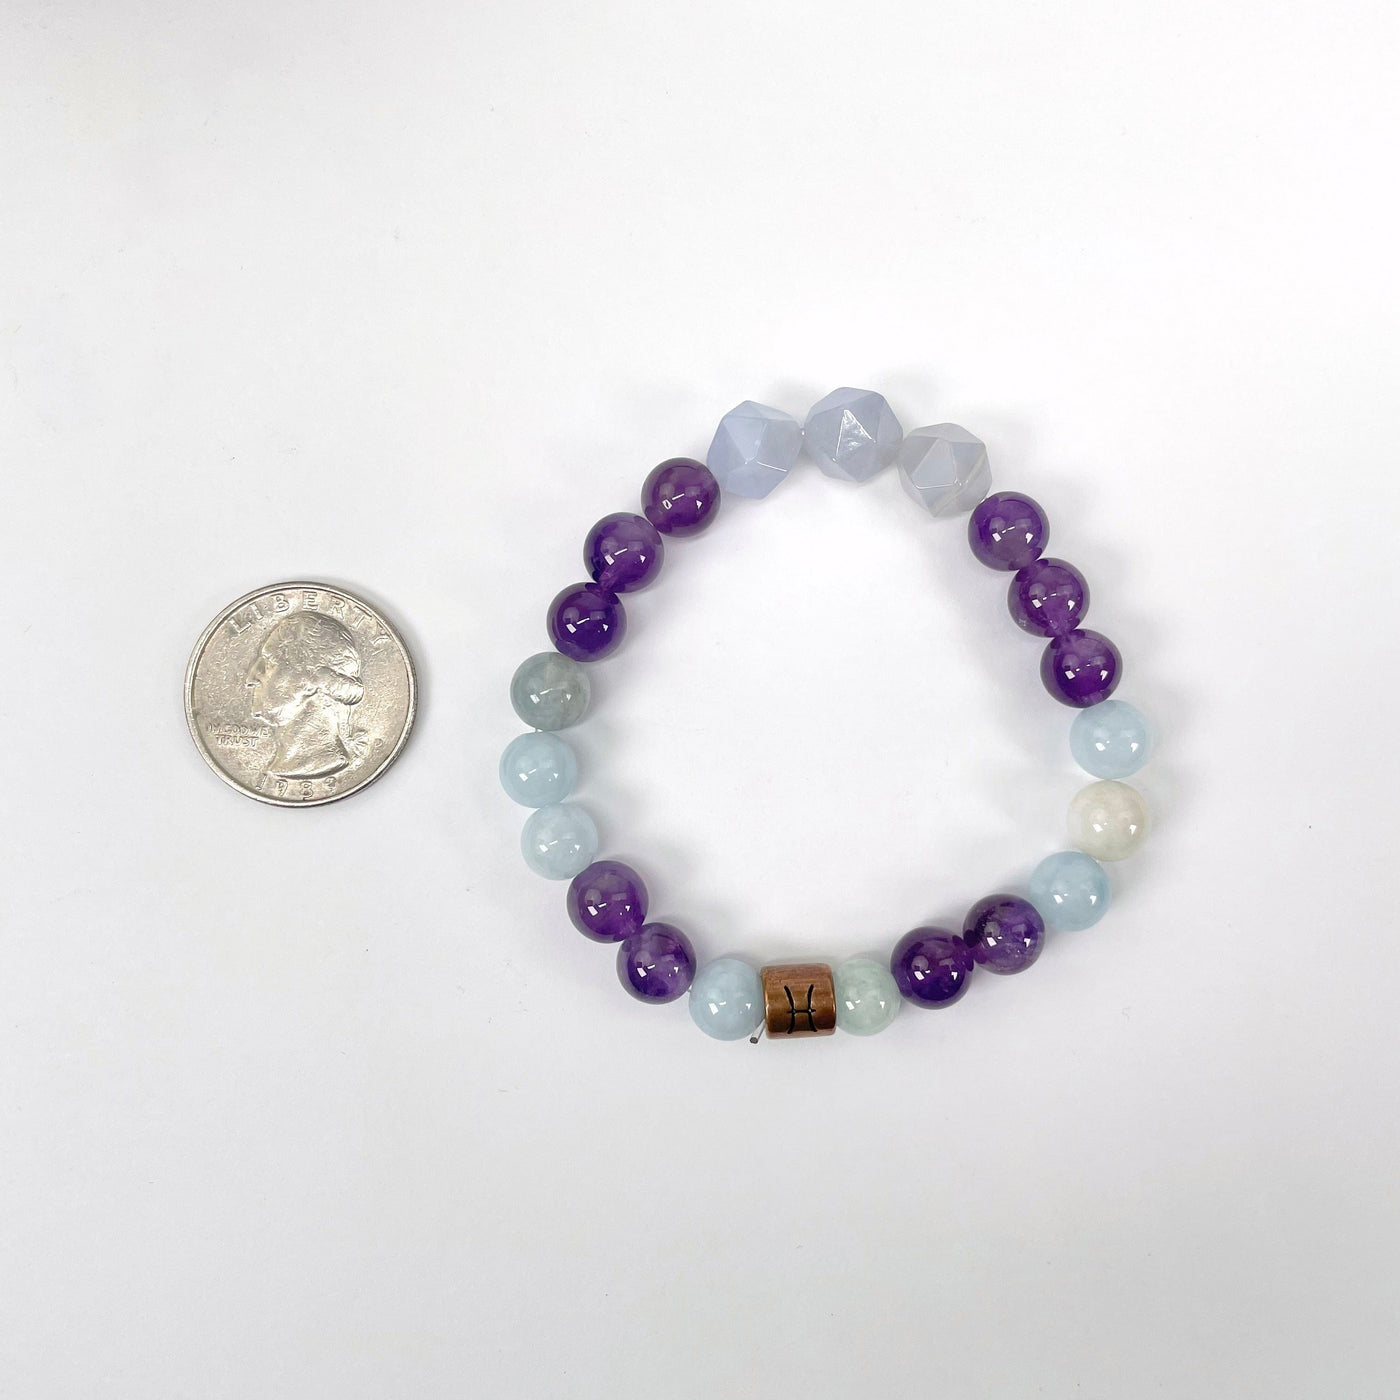 pisces zodiac bracelet with quarter for size reference